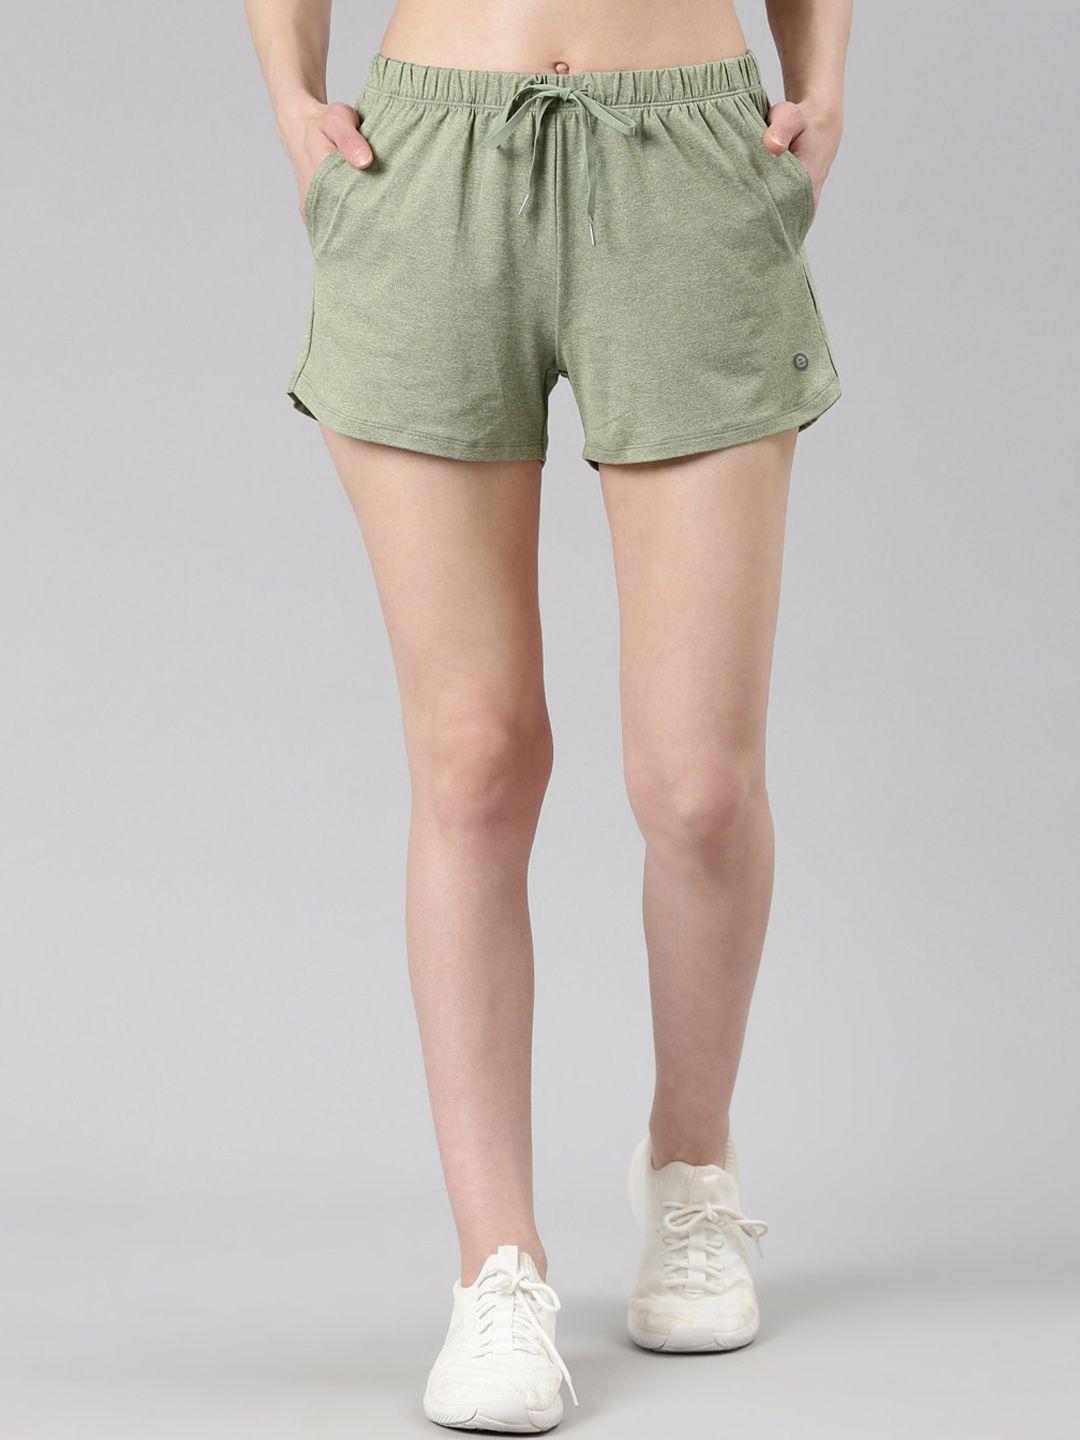 enamor-women-antimicrobial-dry-fit-mid-rise-outdoor-shorts